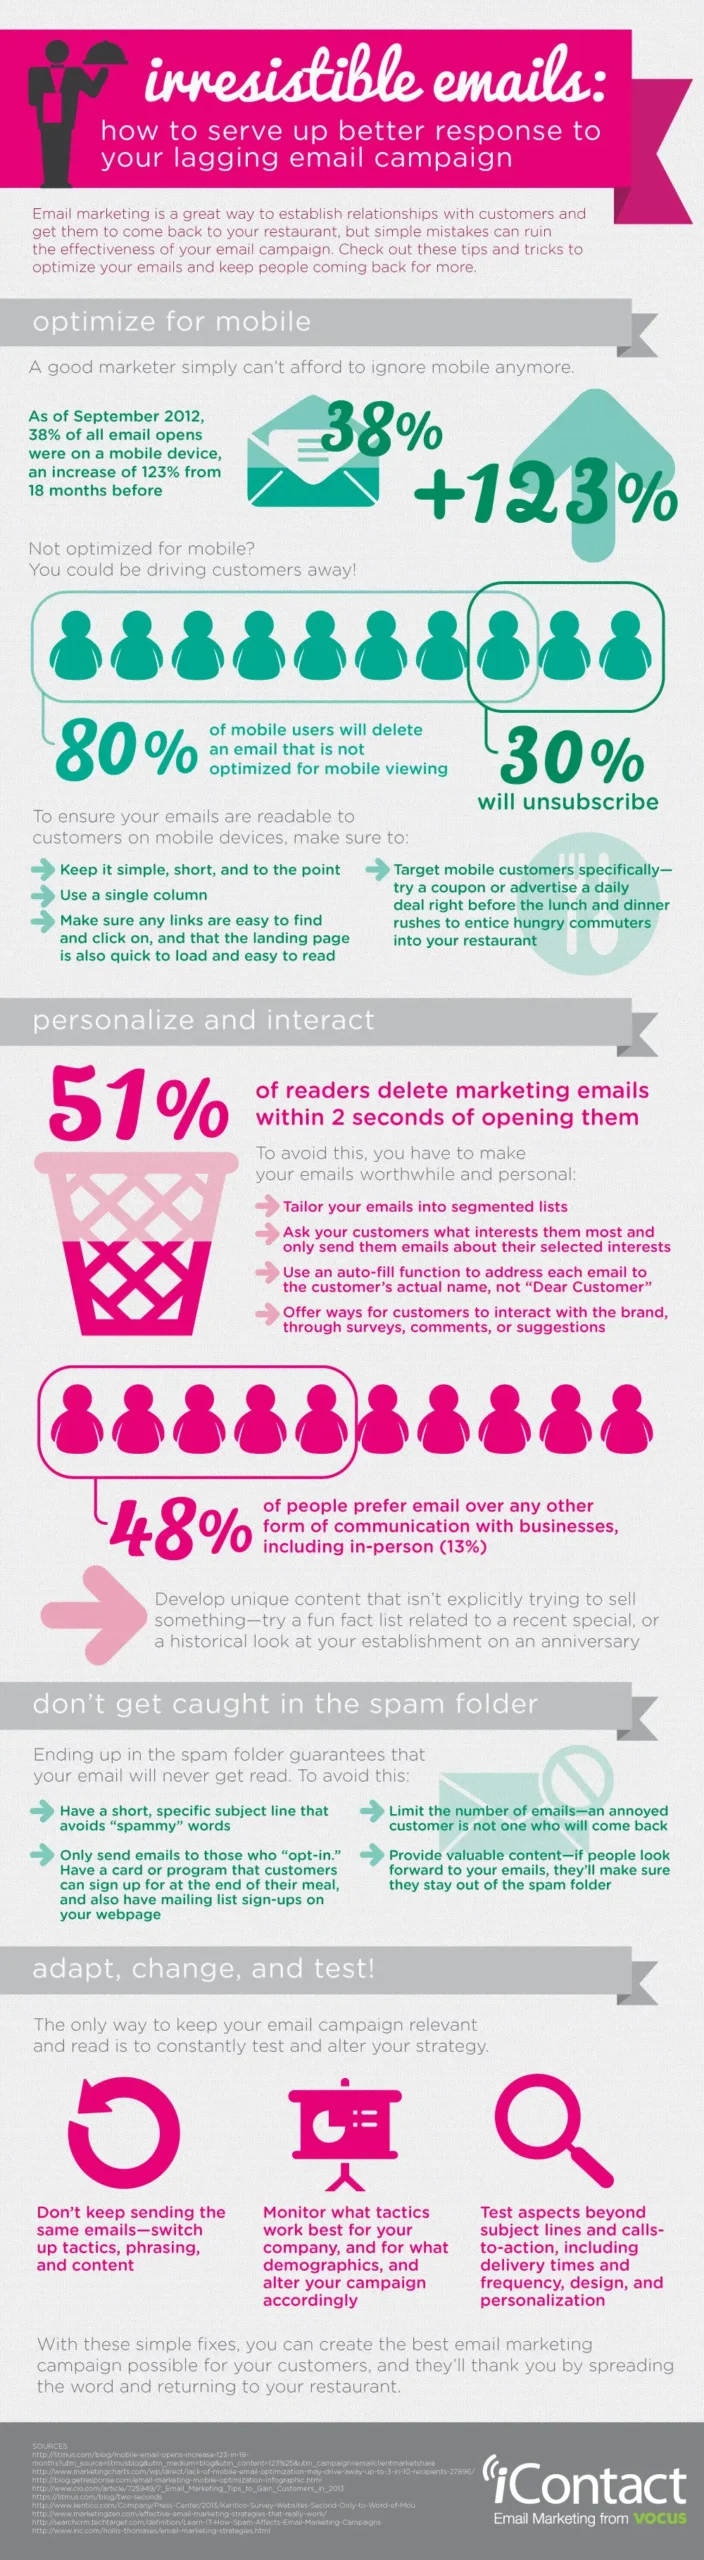 Email Marketing Best Practices Infographic
